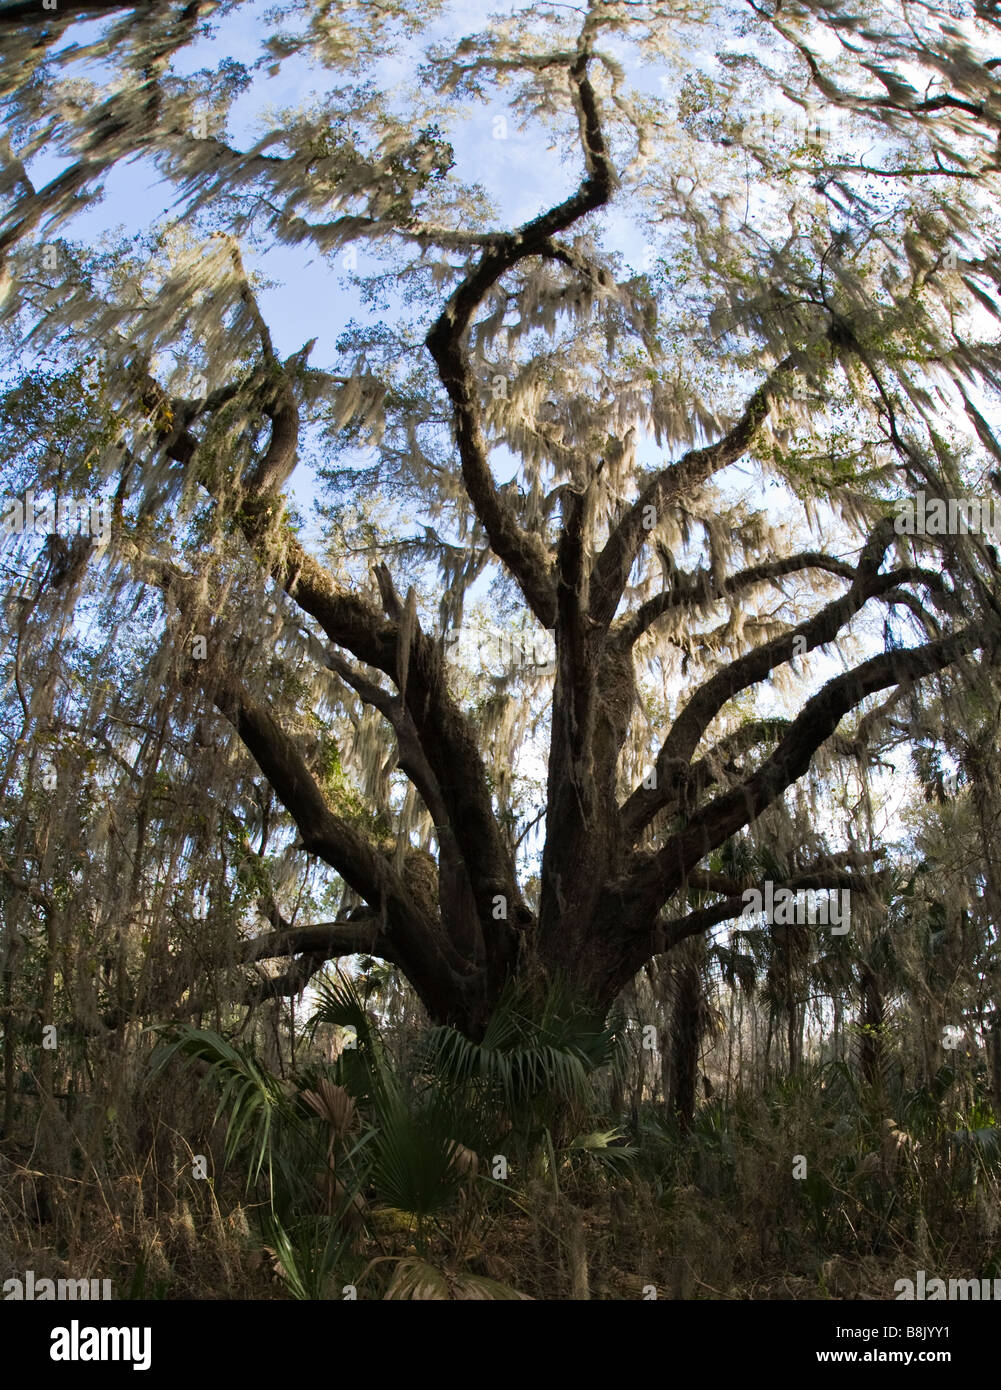 Live Oak tree covered in Spanish Moss in Paynes Prairie Preserve State Park in Micanopy near Gainesville Florida Stock Photo